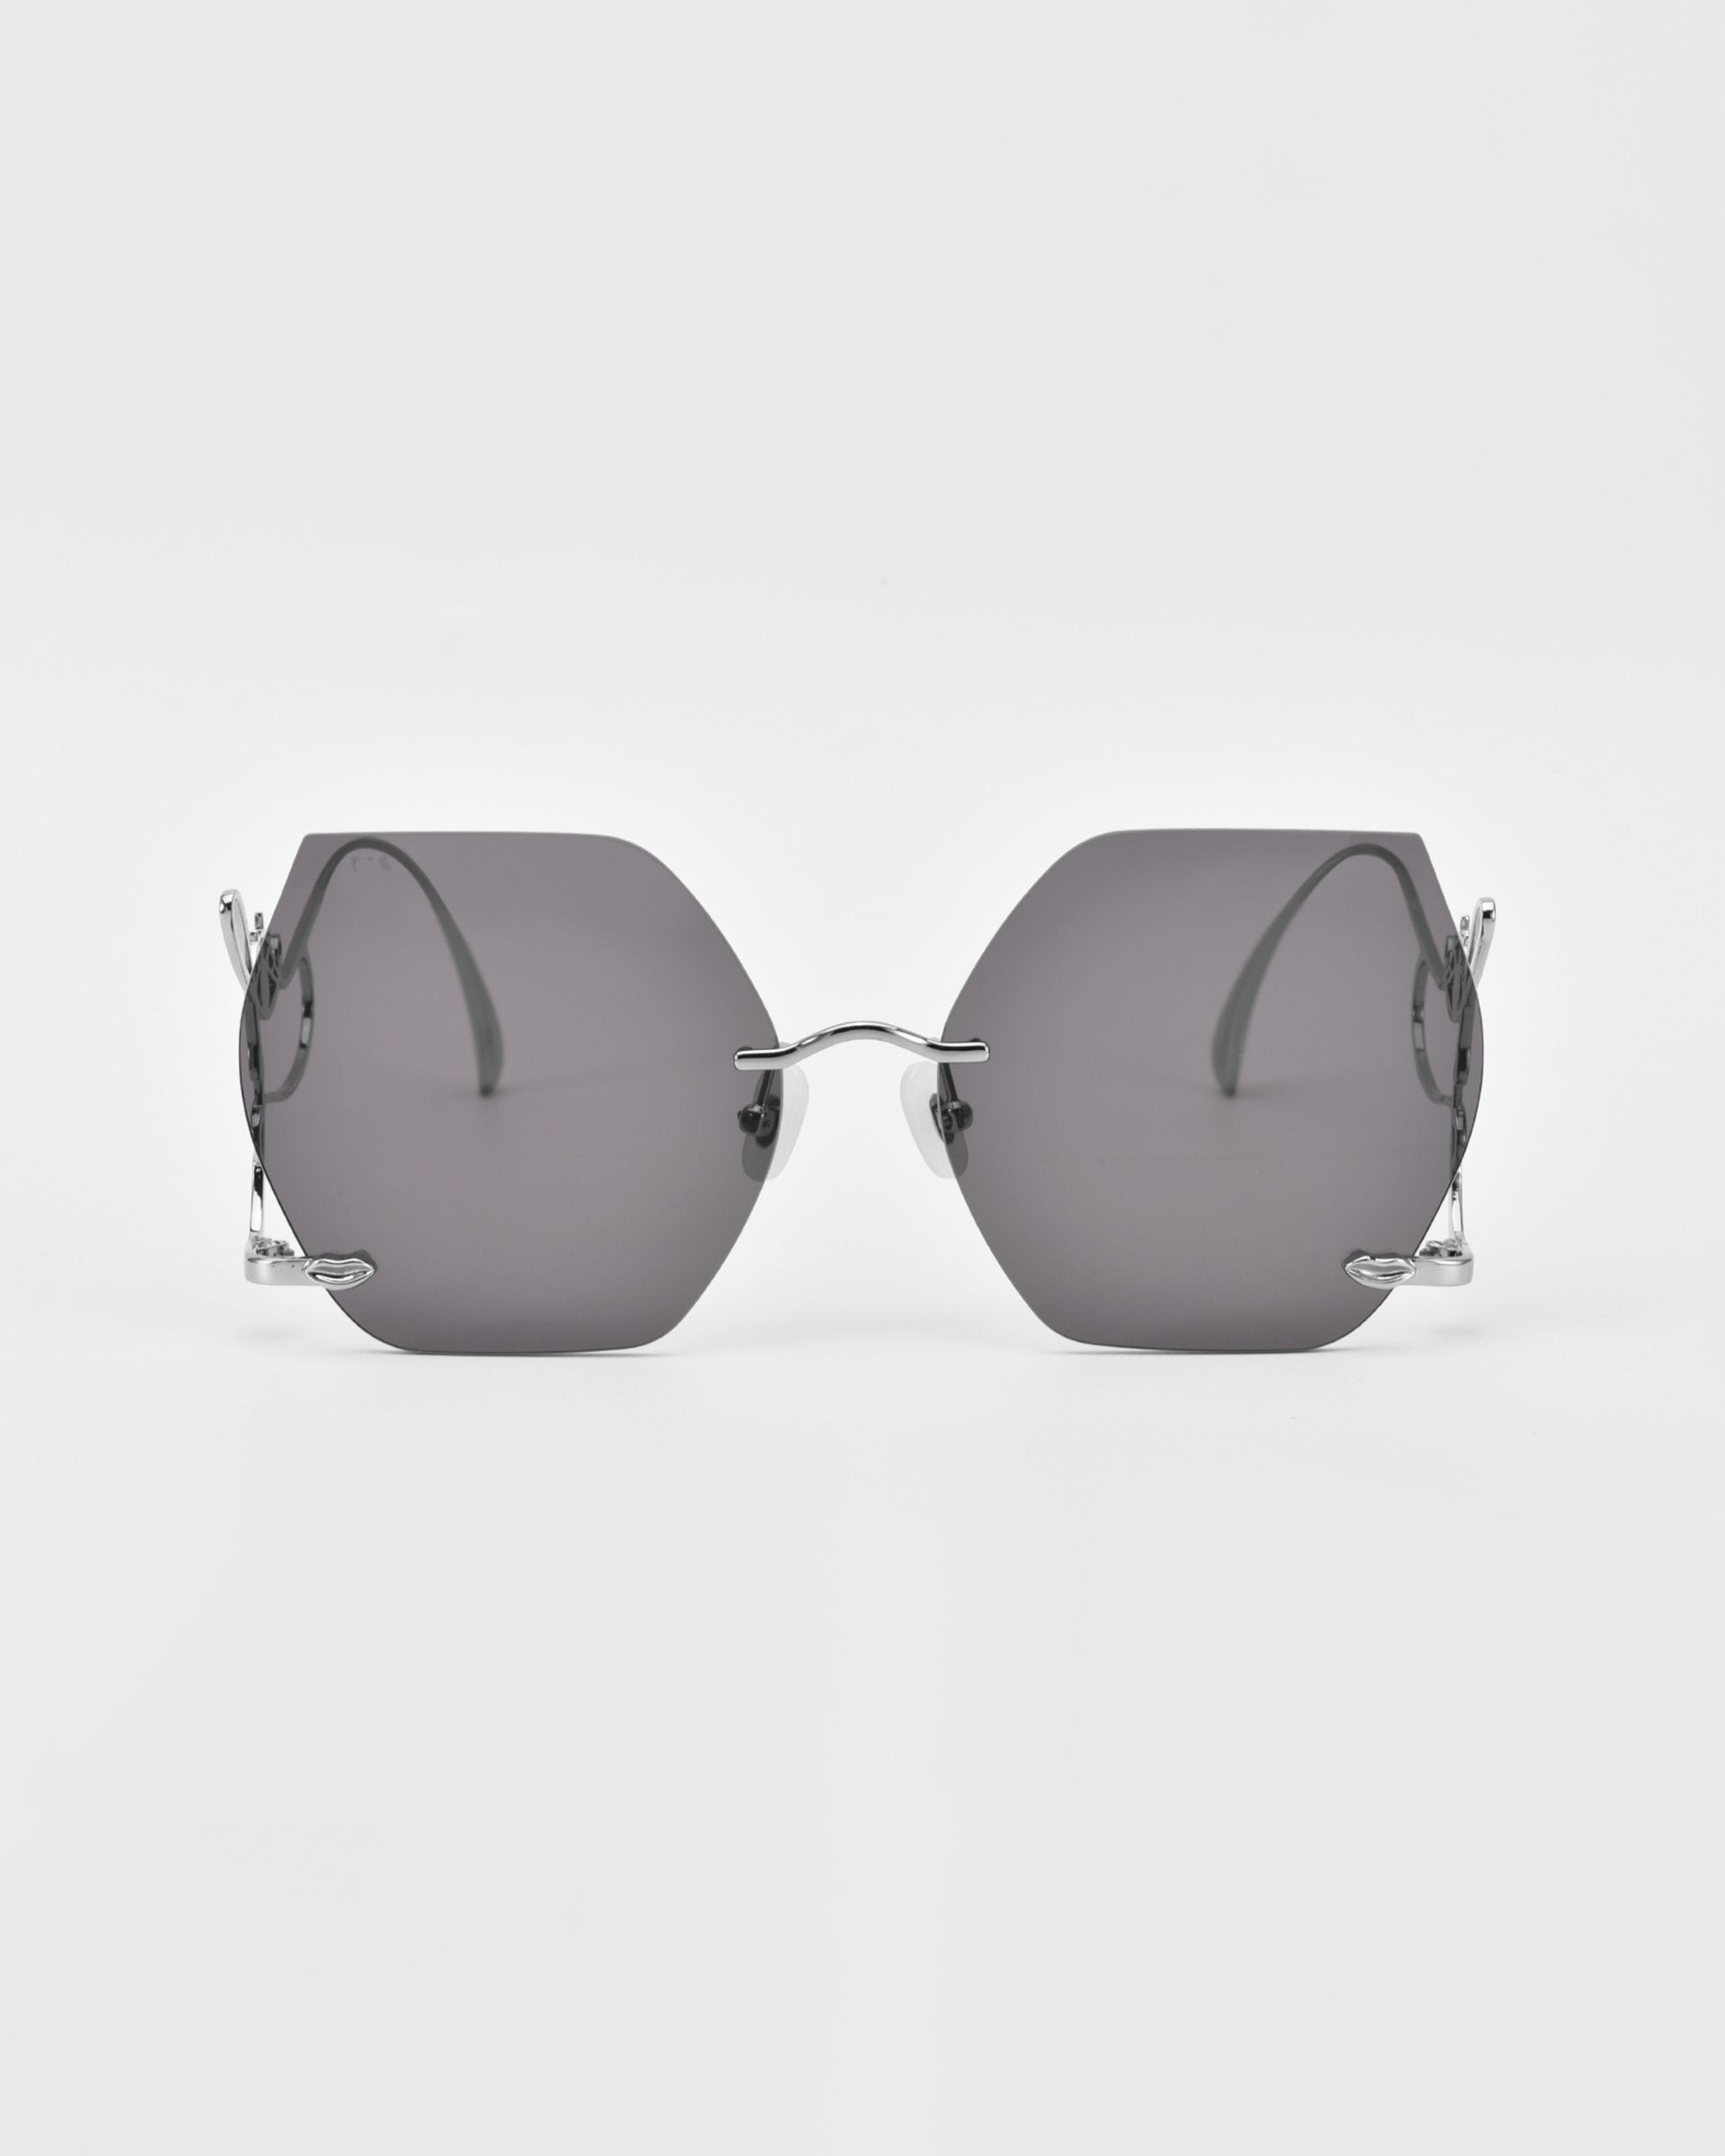 A pair of stylish, rimless, hexagon-shaped sunglasses with dark tinted lenses and thin metal arms. These limited edition Cry Me a River sunglasses by For Art's Sake® stand out against the white background, highlighting their sleek design and modern aesthetic.